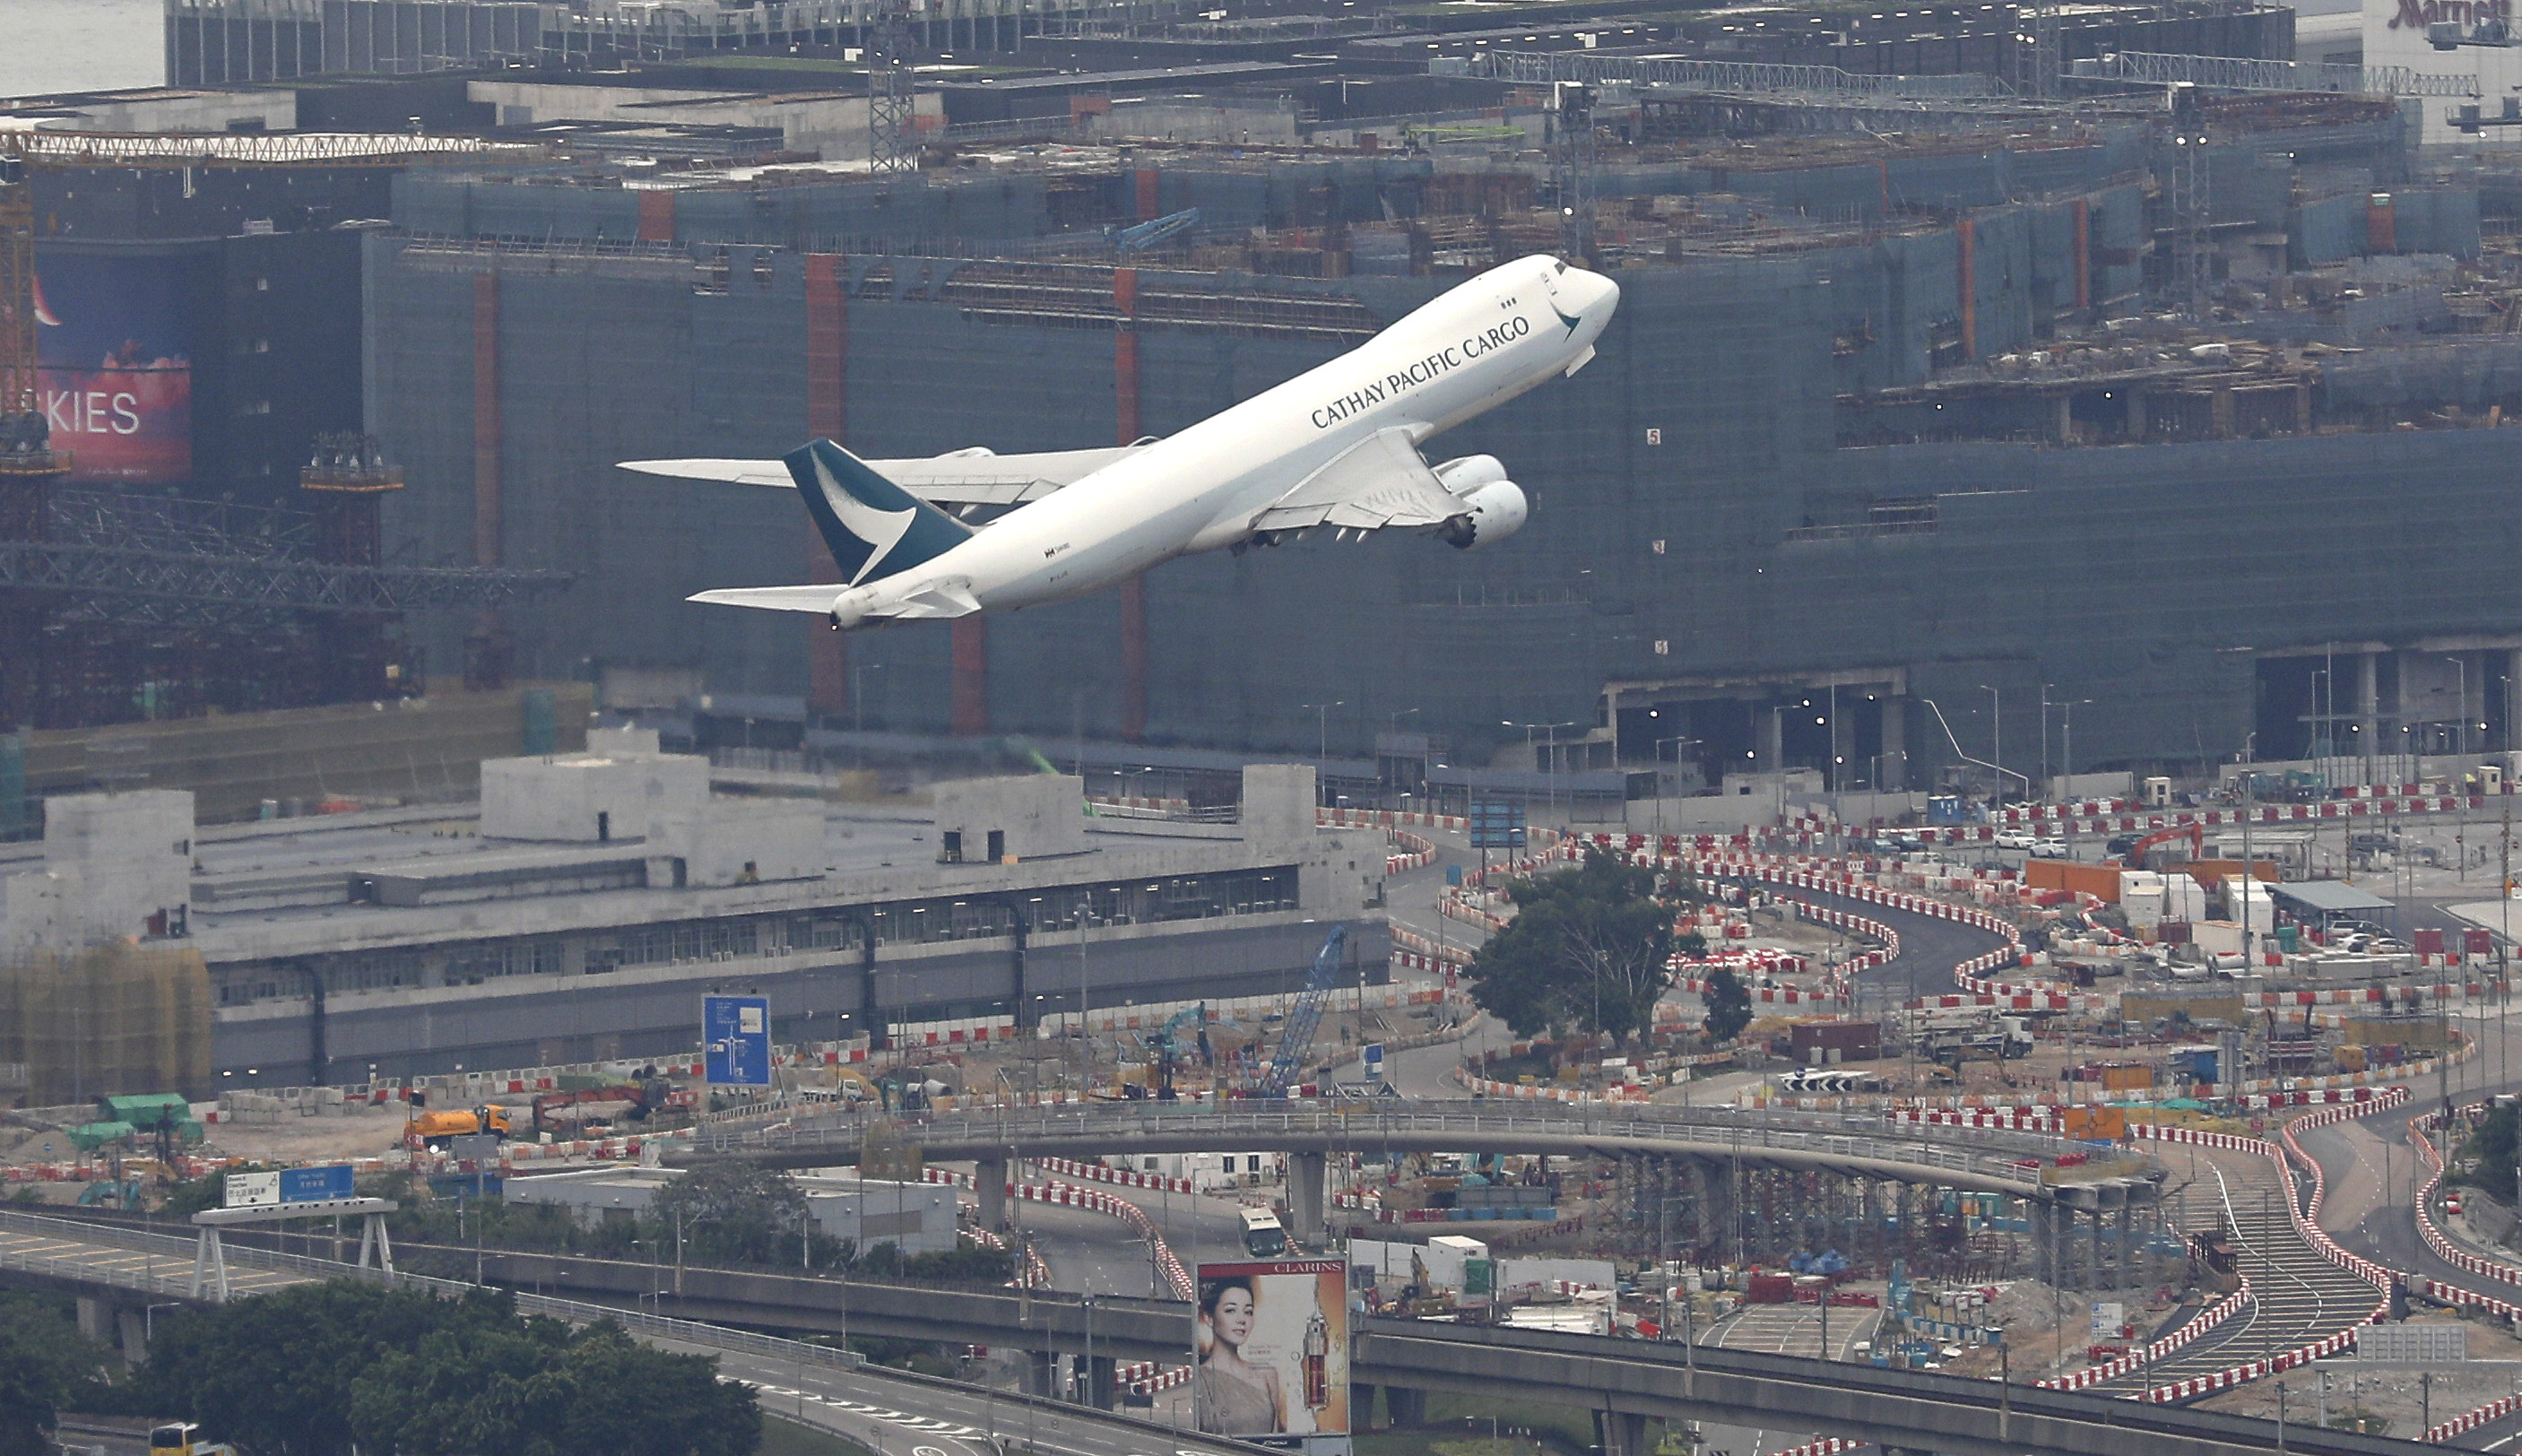 A Cathay Pacific cargo plane takes off in March 2022, above the third runway that is under construction at Chek Lap Kok. Photo: Yik Yeung-man